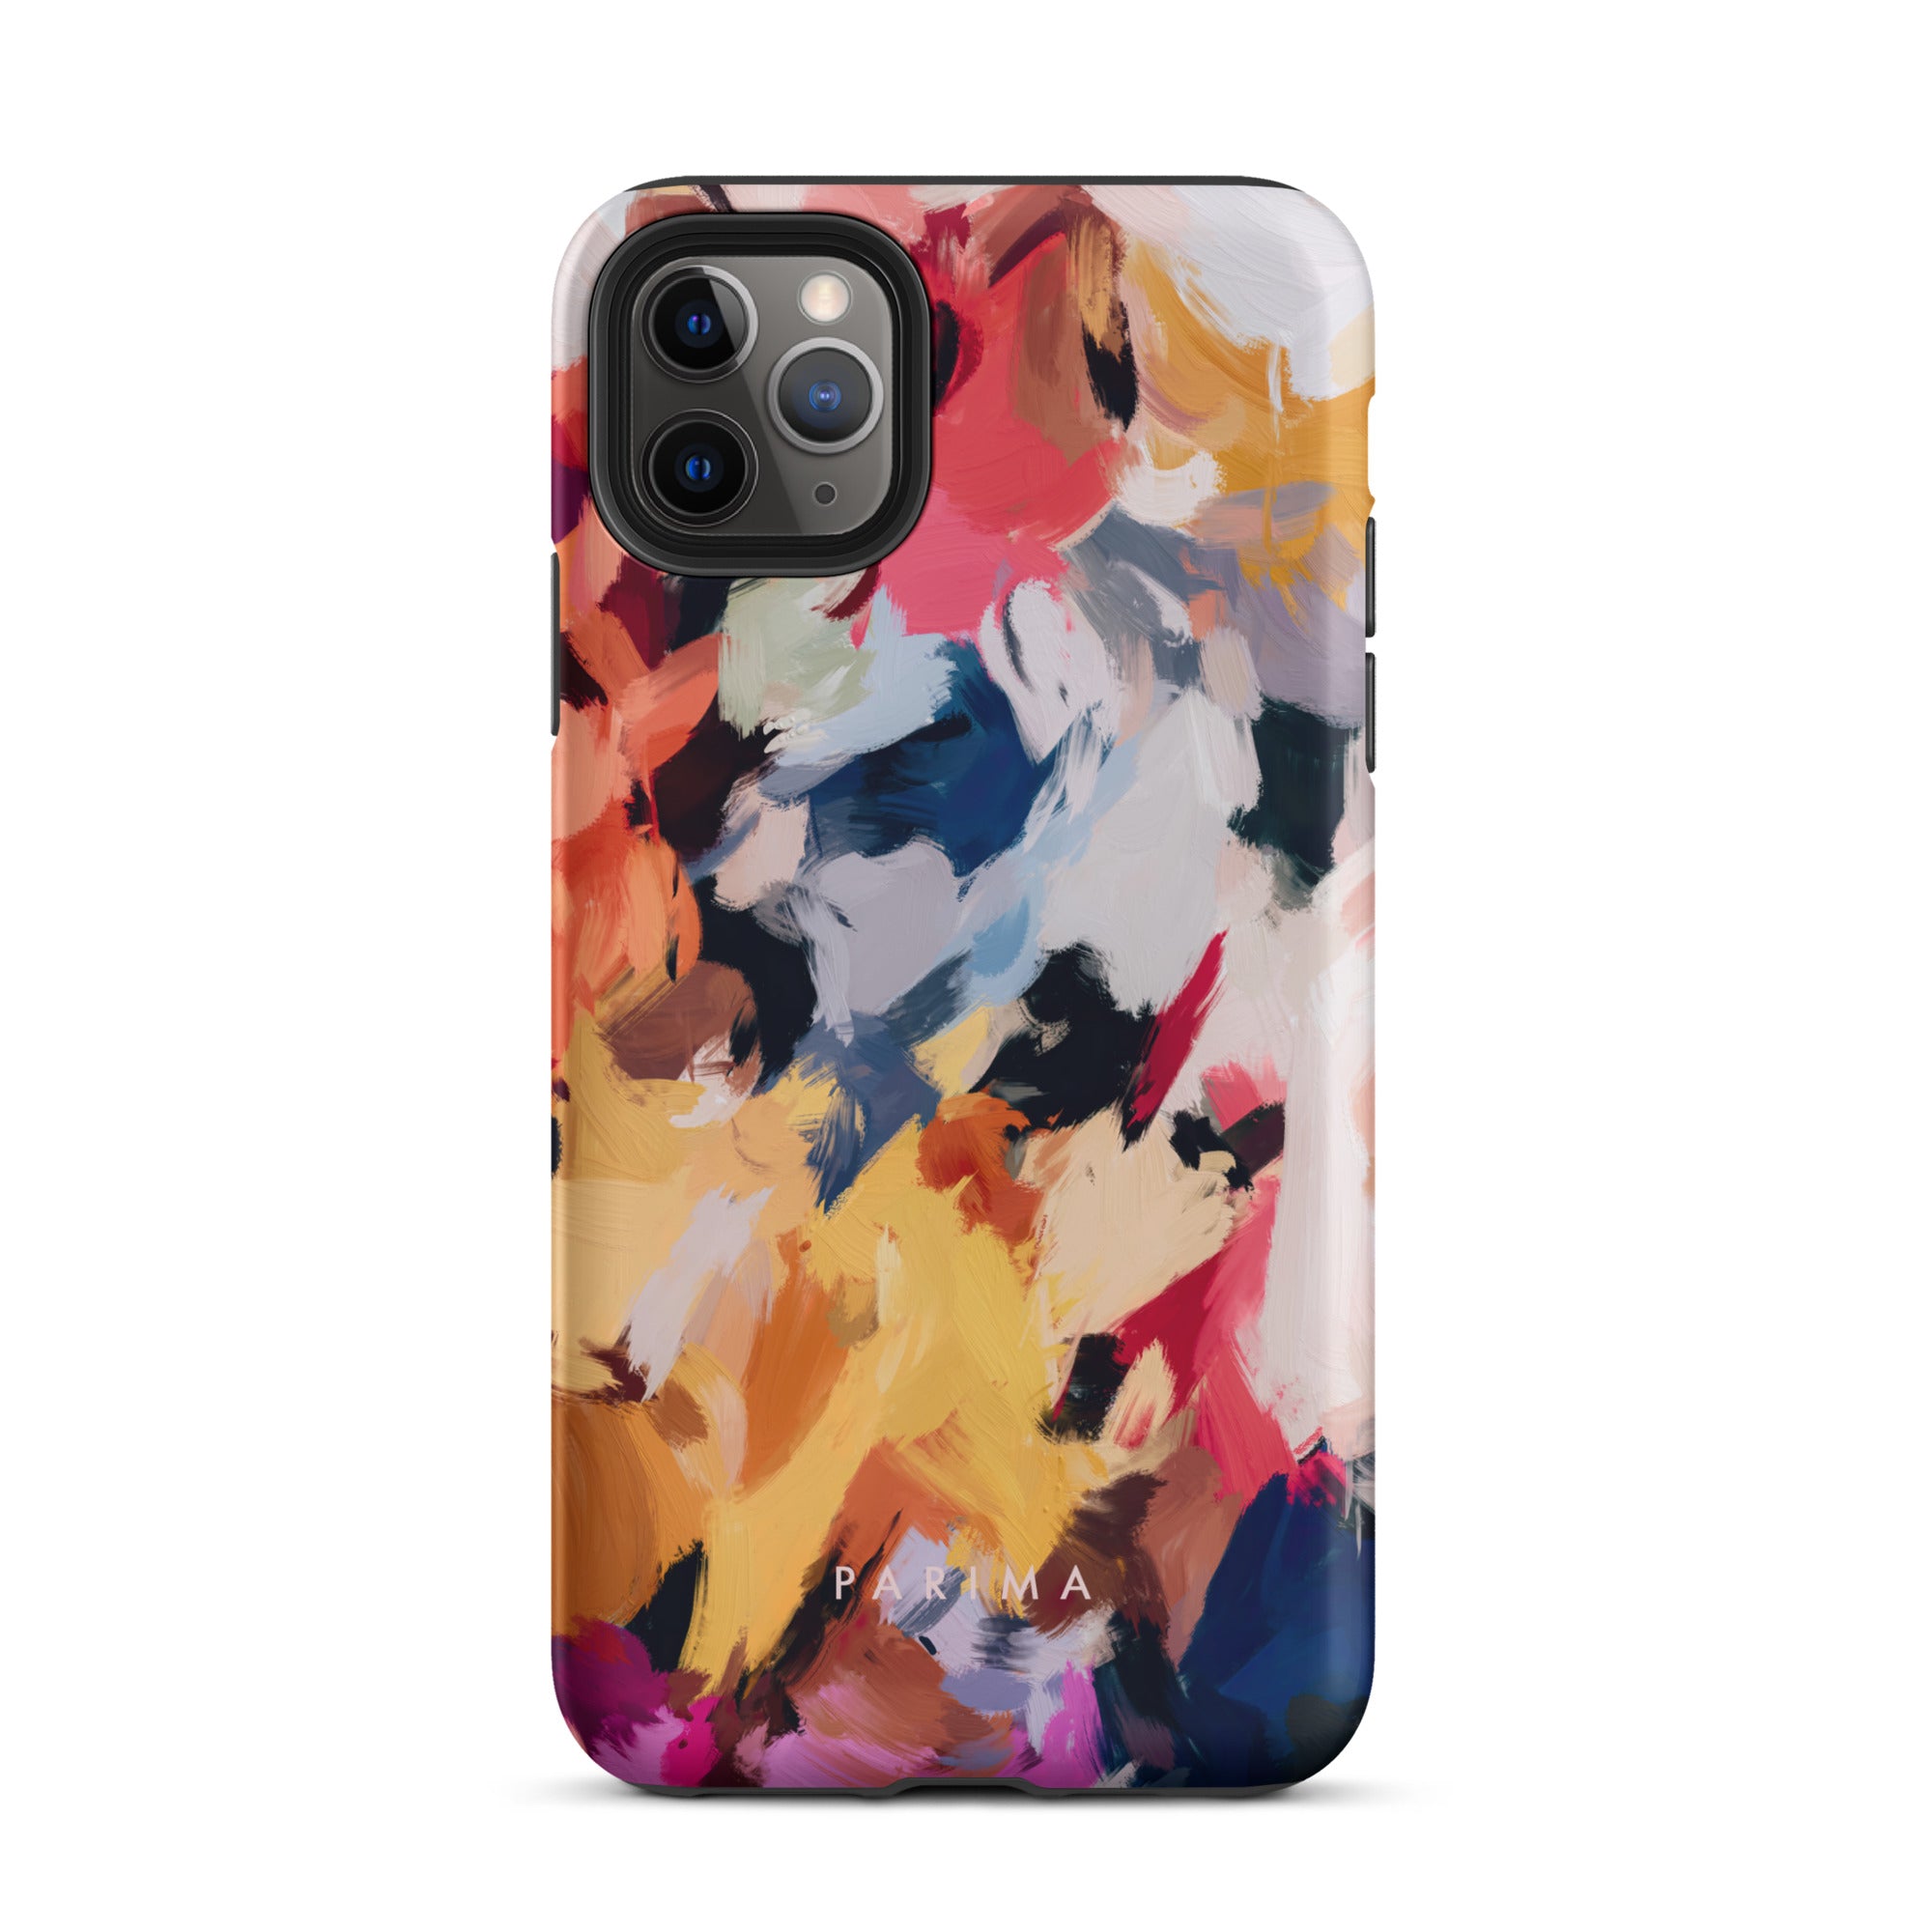 Wilde, blue and yellow abstract art on iPhone 11 Pro Max tough case by Parima Studio